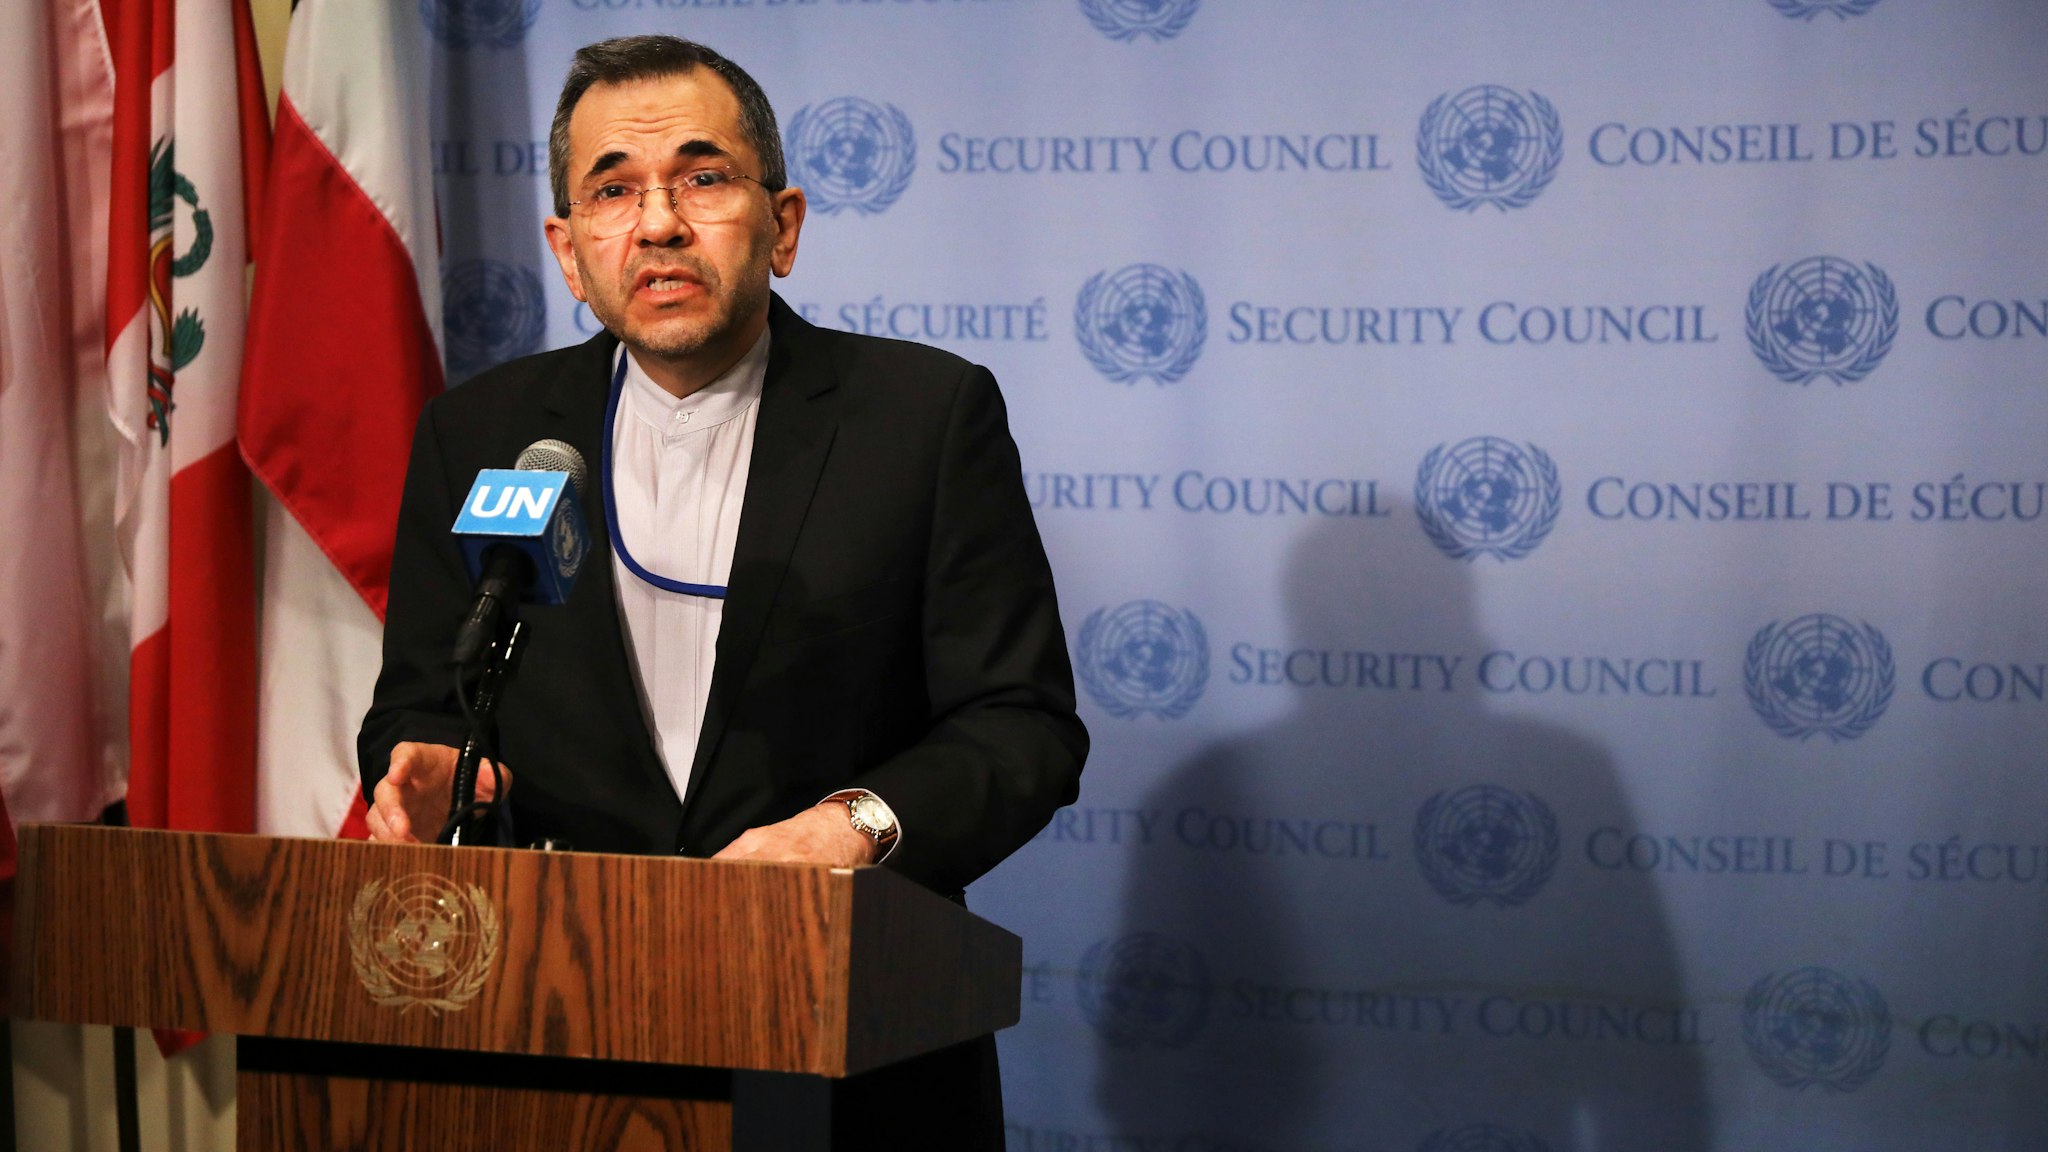 NEW YORK, NEW YORK - JUNE 24: Iran's Ambassador to the United Nations (UN) Majid Takht Ravanchi speaks to the media before a meeting with other UN members on the escalating situation with the United States At United Nation headquarters on June 24, 2019 in New York City. The Trump administration has imposed fresh sanctions on the country following last week’s shooting down by Iran of a U.S. surveillance drone over the Strait of Hormuz.